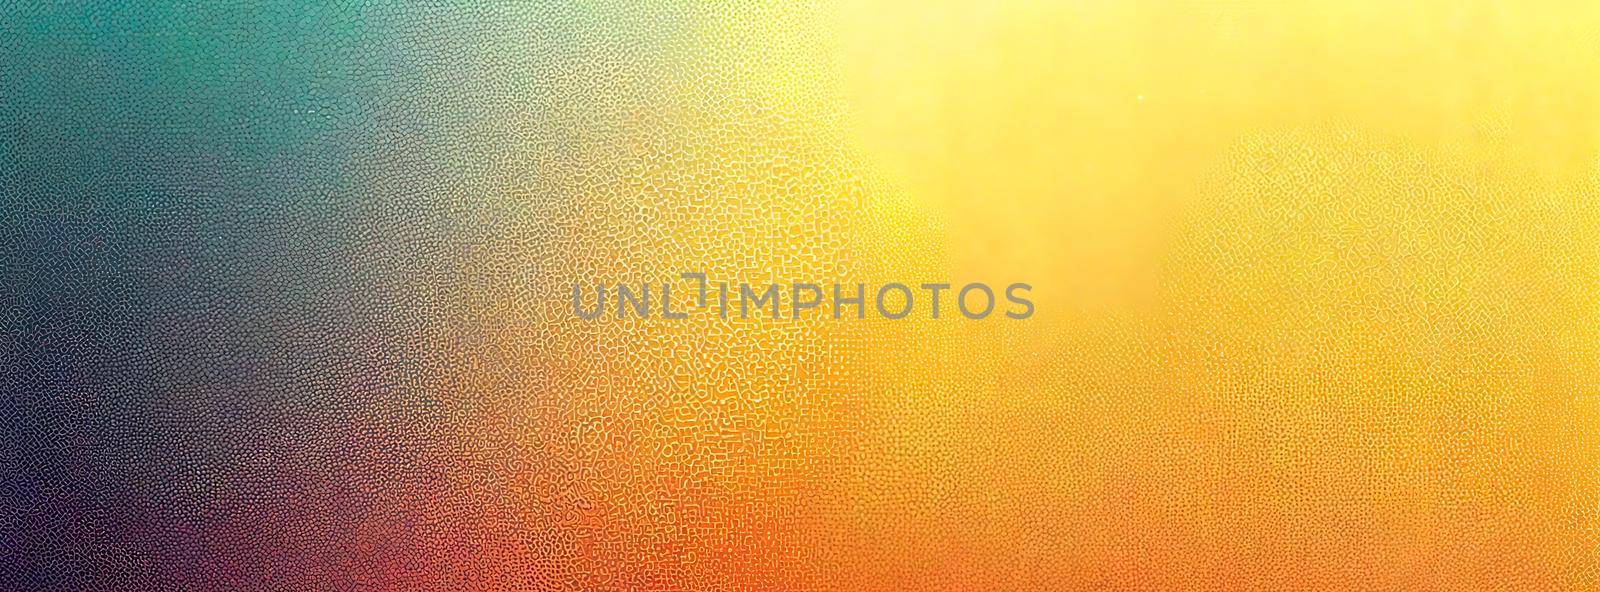 Smooth colorful template banner with gradient color. Design with liquid shape abstract background modern hipster futuristic graphic.